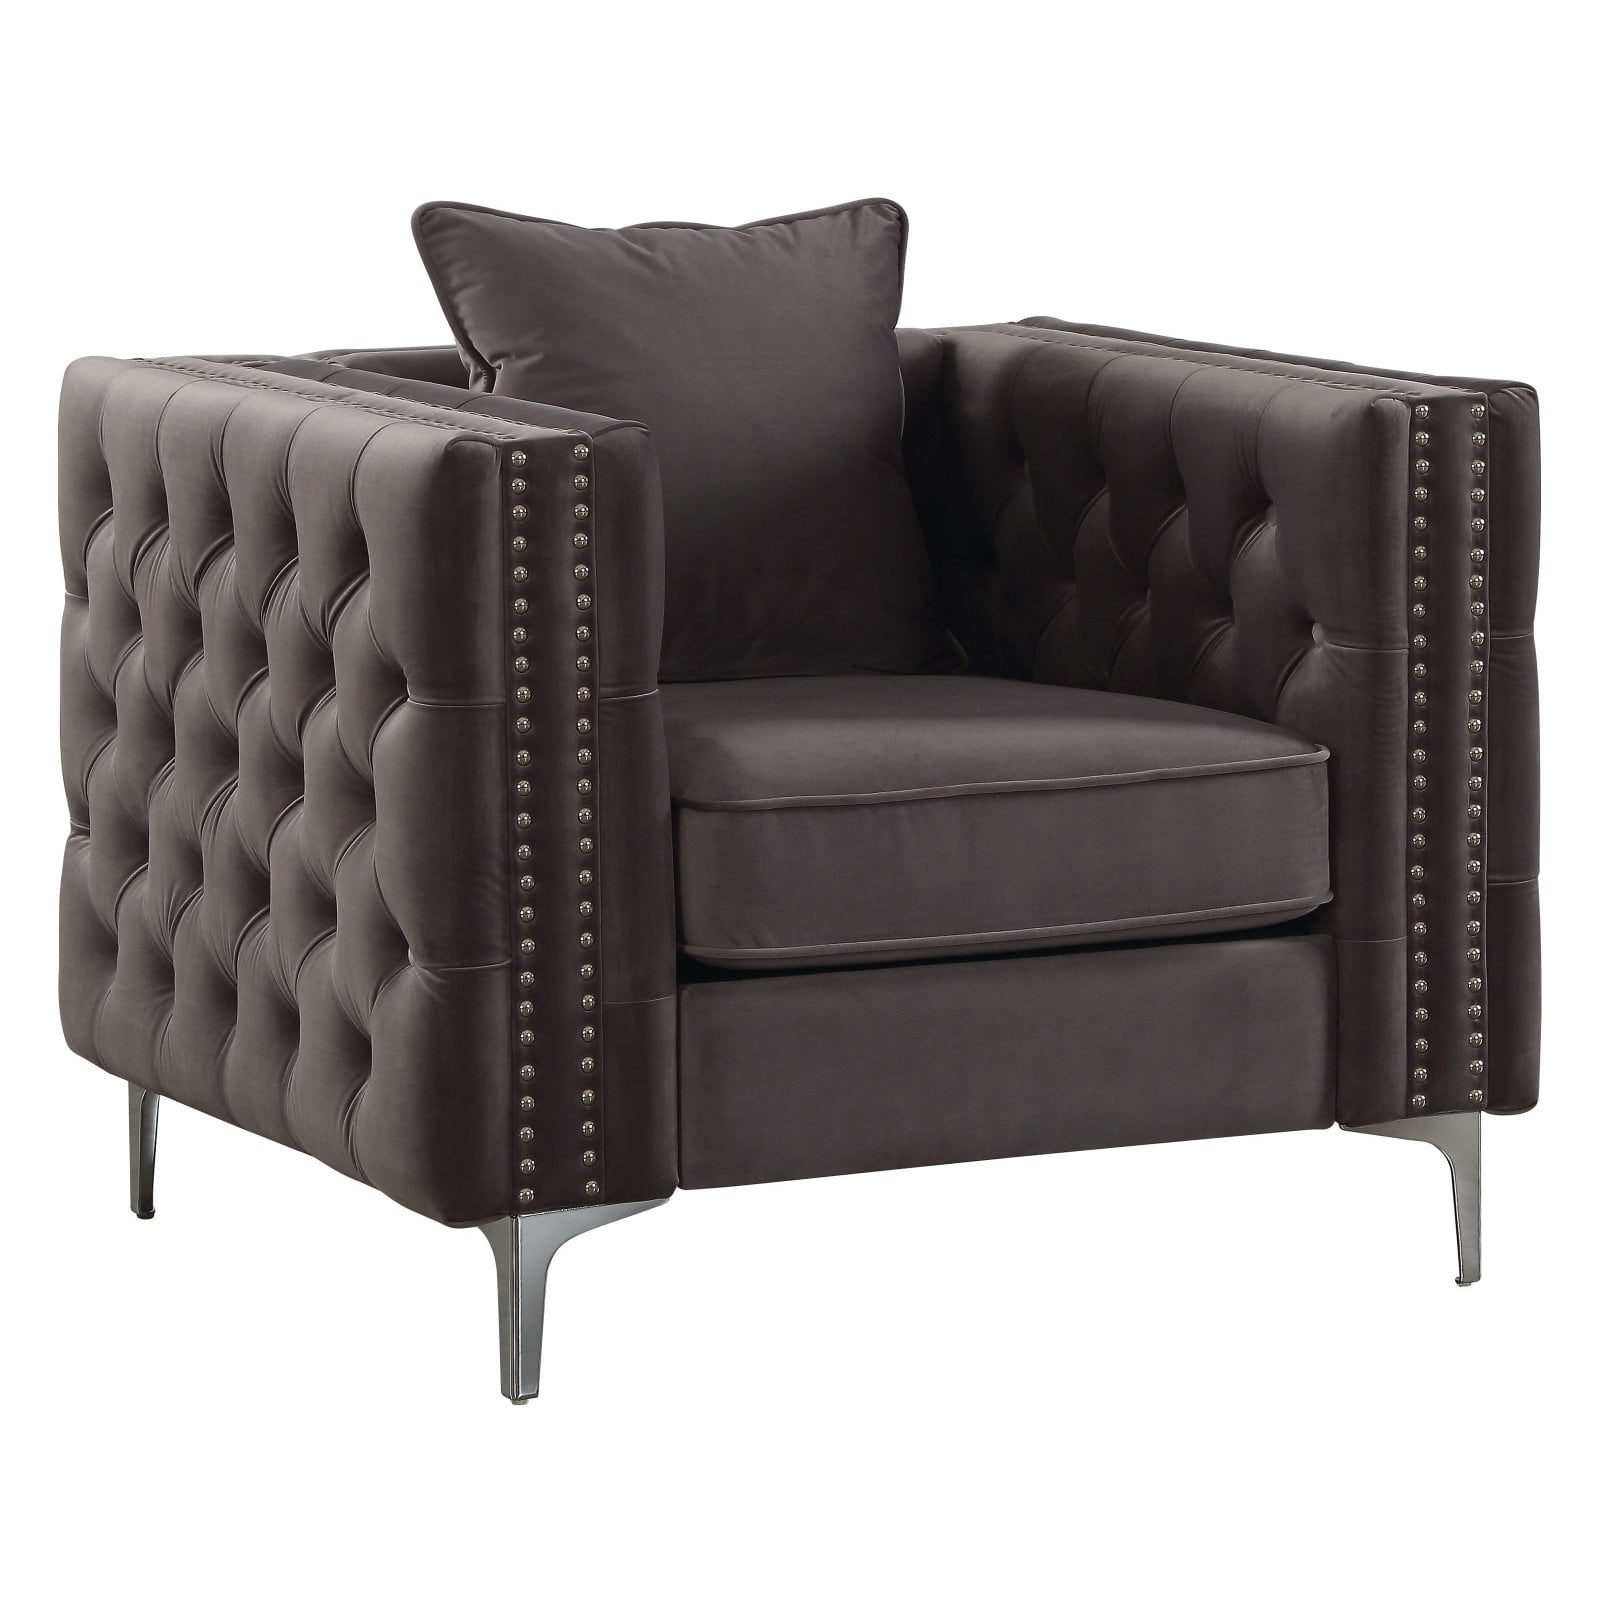 Picture of ACME 53389 2 Piece Gillian II Chair with 1 Pillow - Dark Gray Velvet